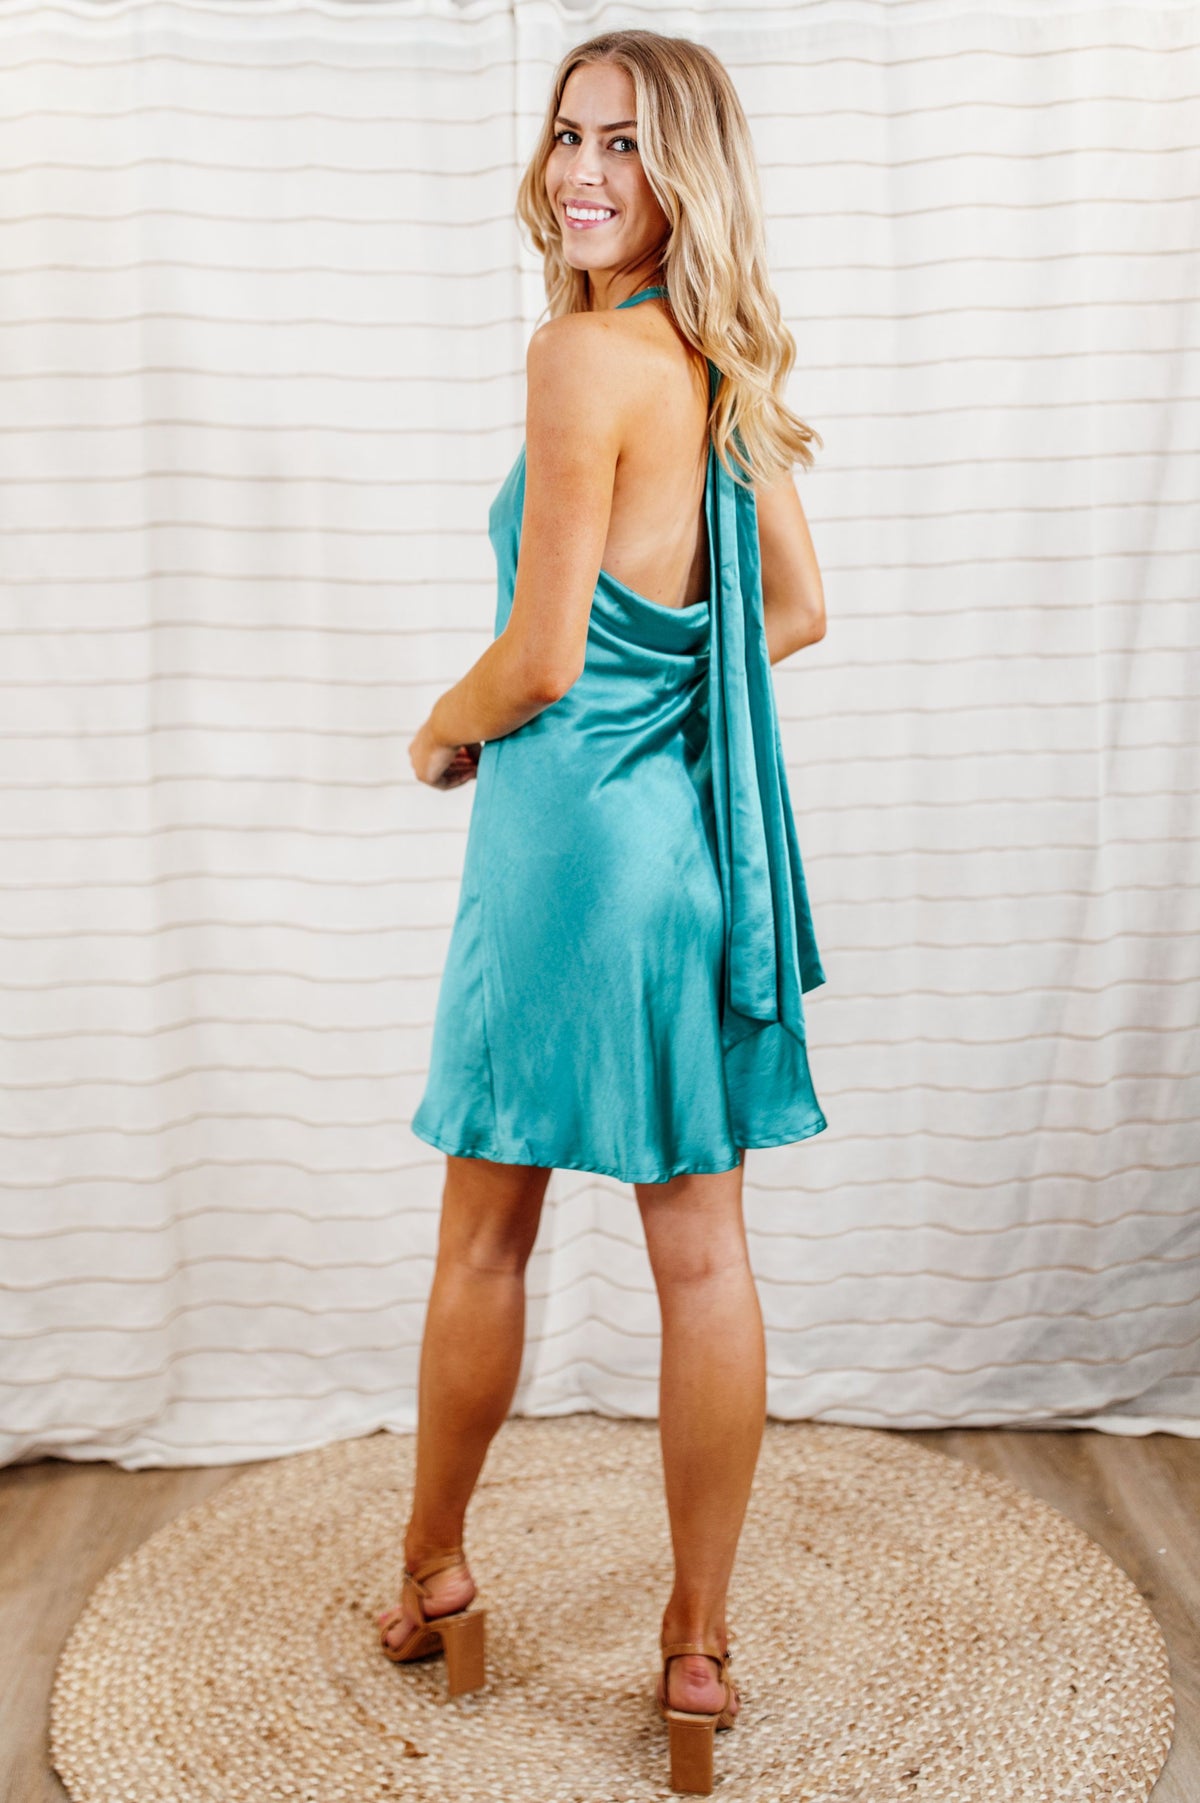 Bright teal, silky satin mini halter dress with cowl neck and flowy skirt on model.